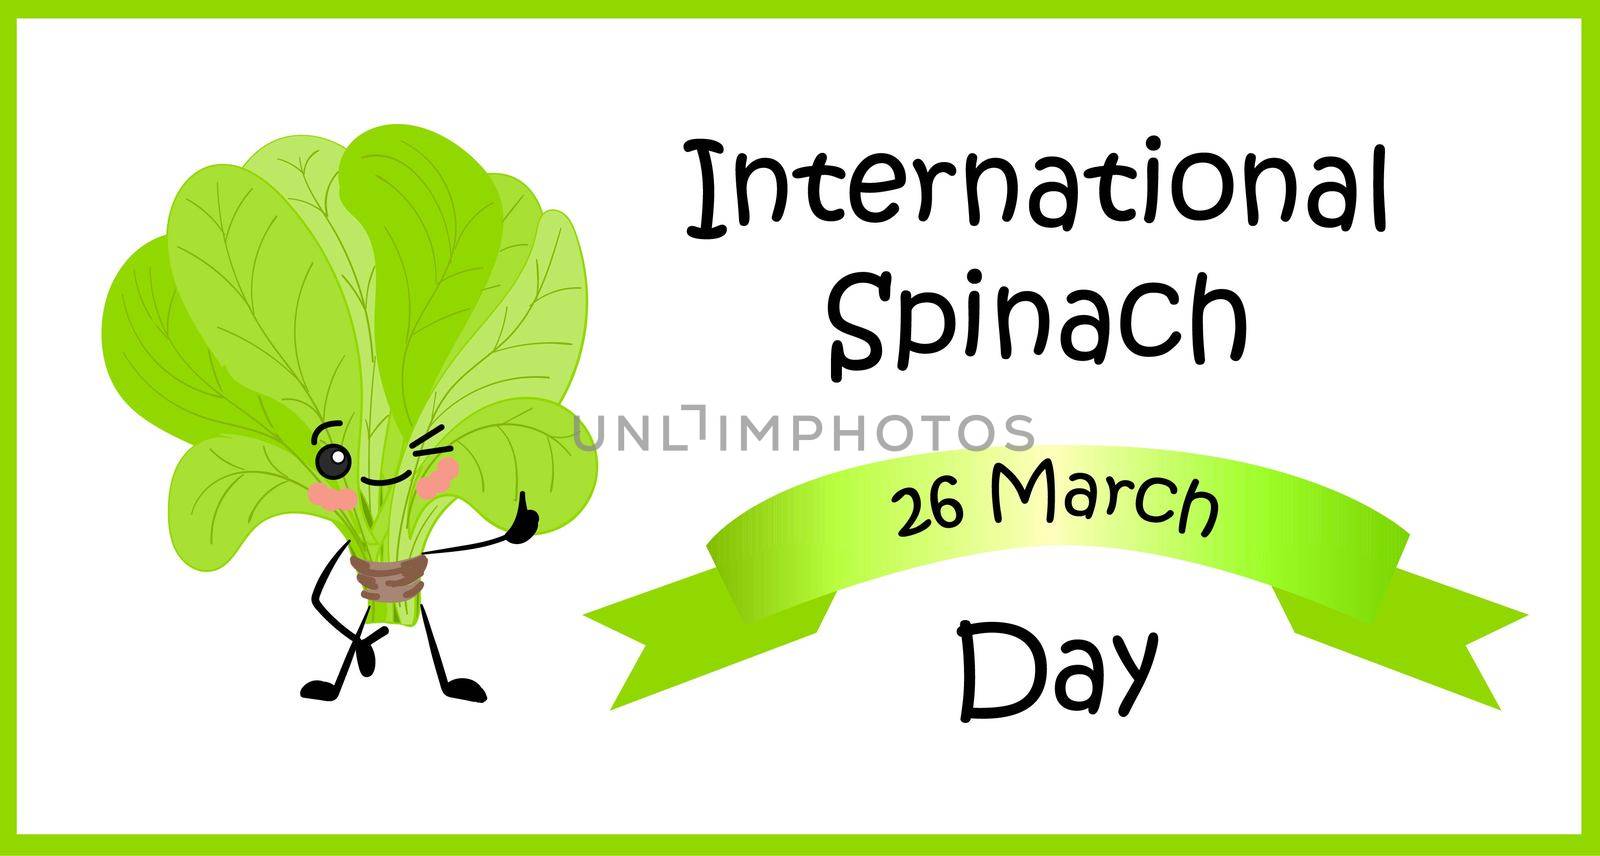 International spinach day. Greens and vegetables. 26 March. Antioxidant, lutein Sorrel leaves